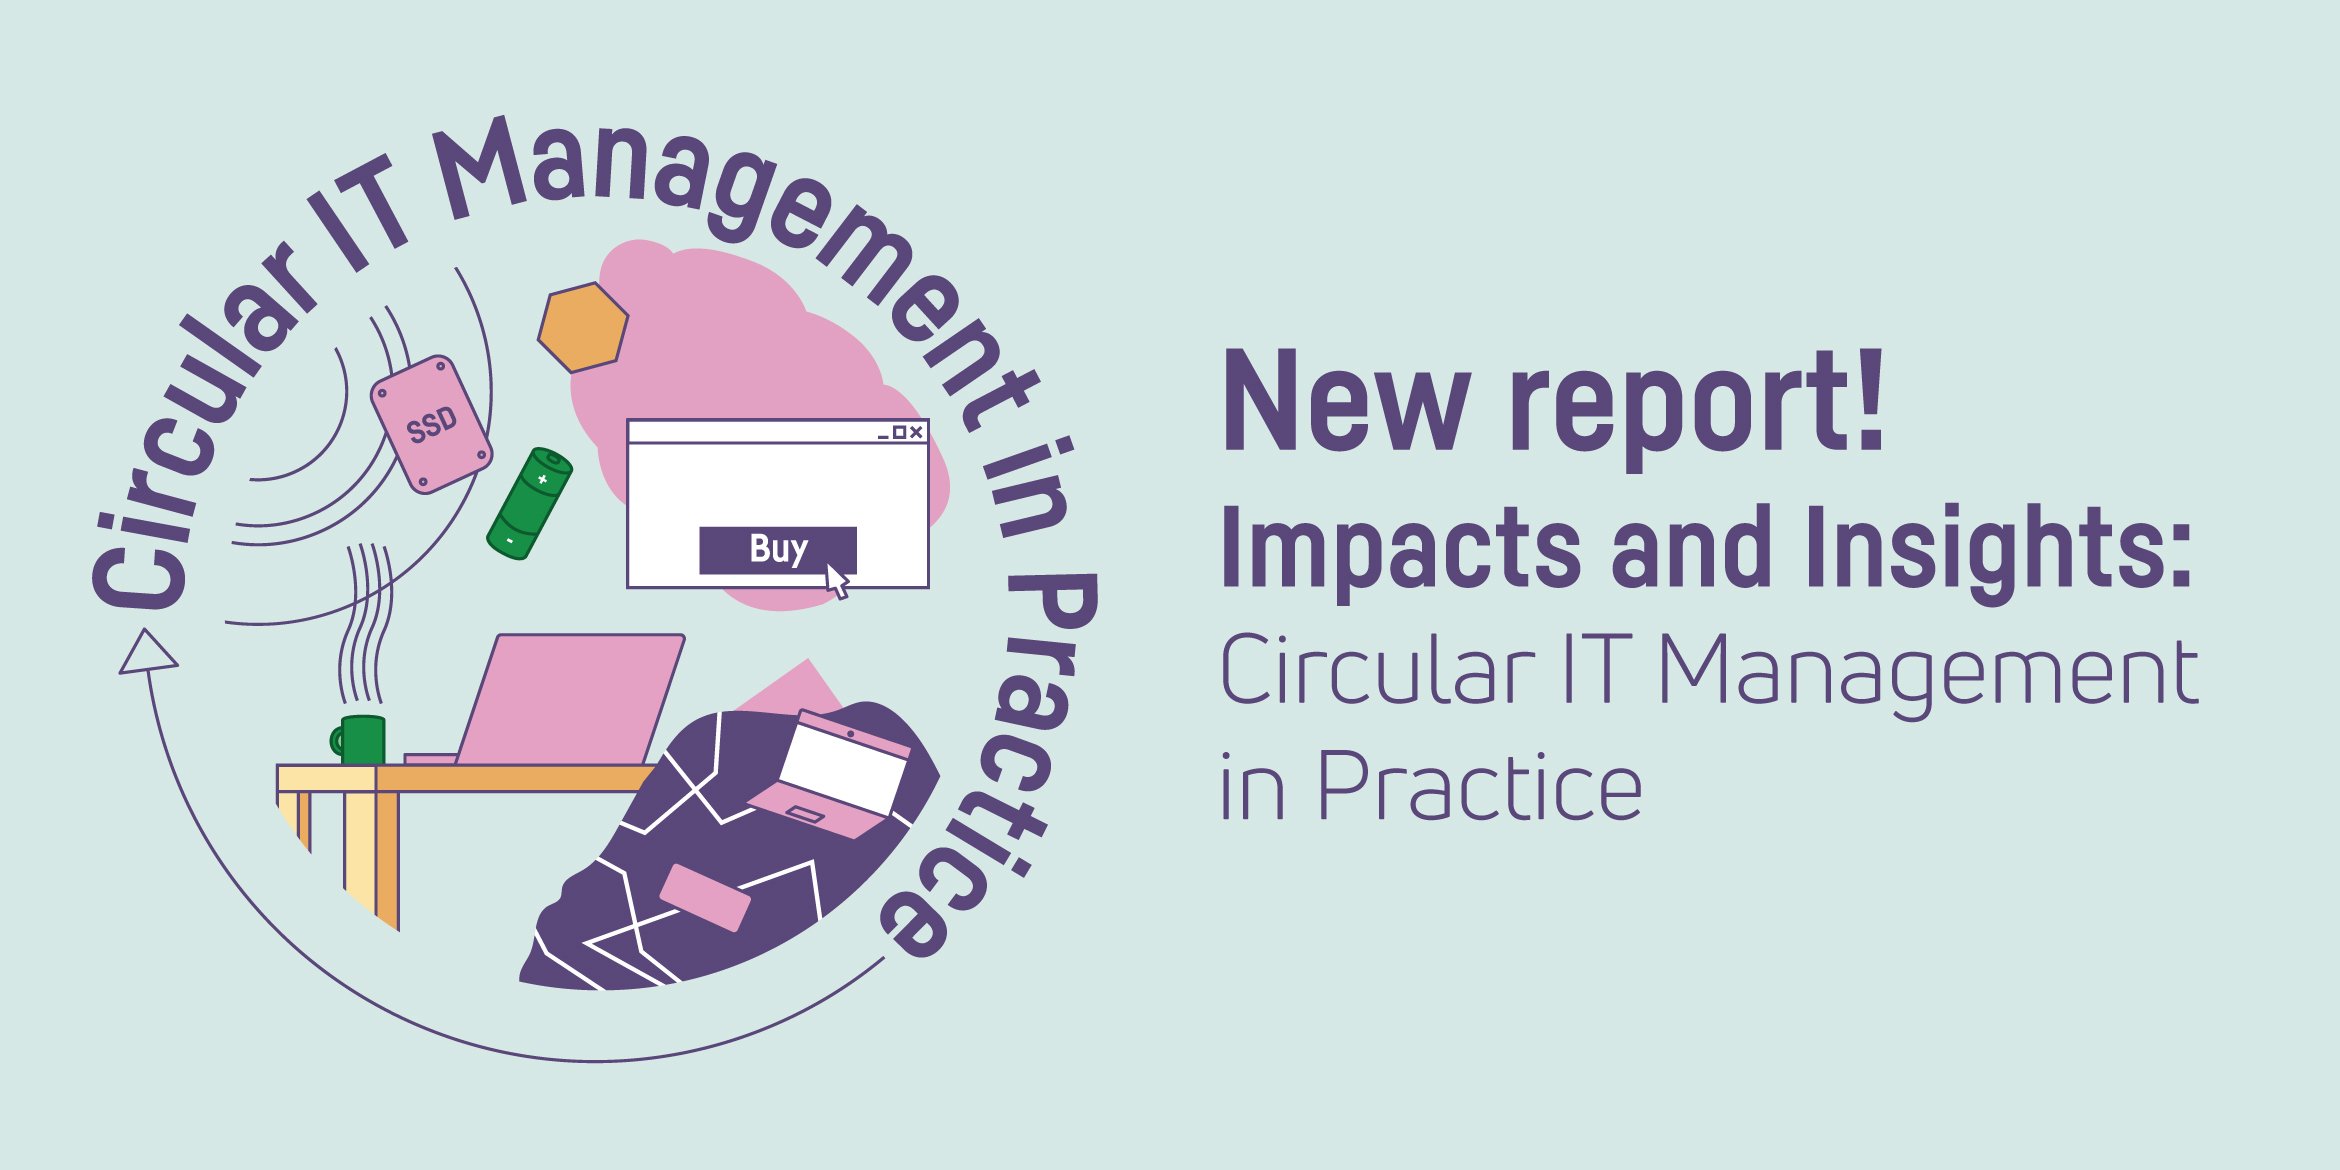 New report helps organizations with circular IT management